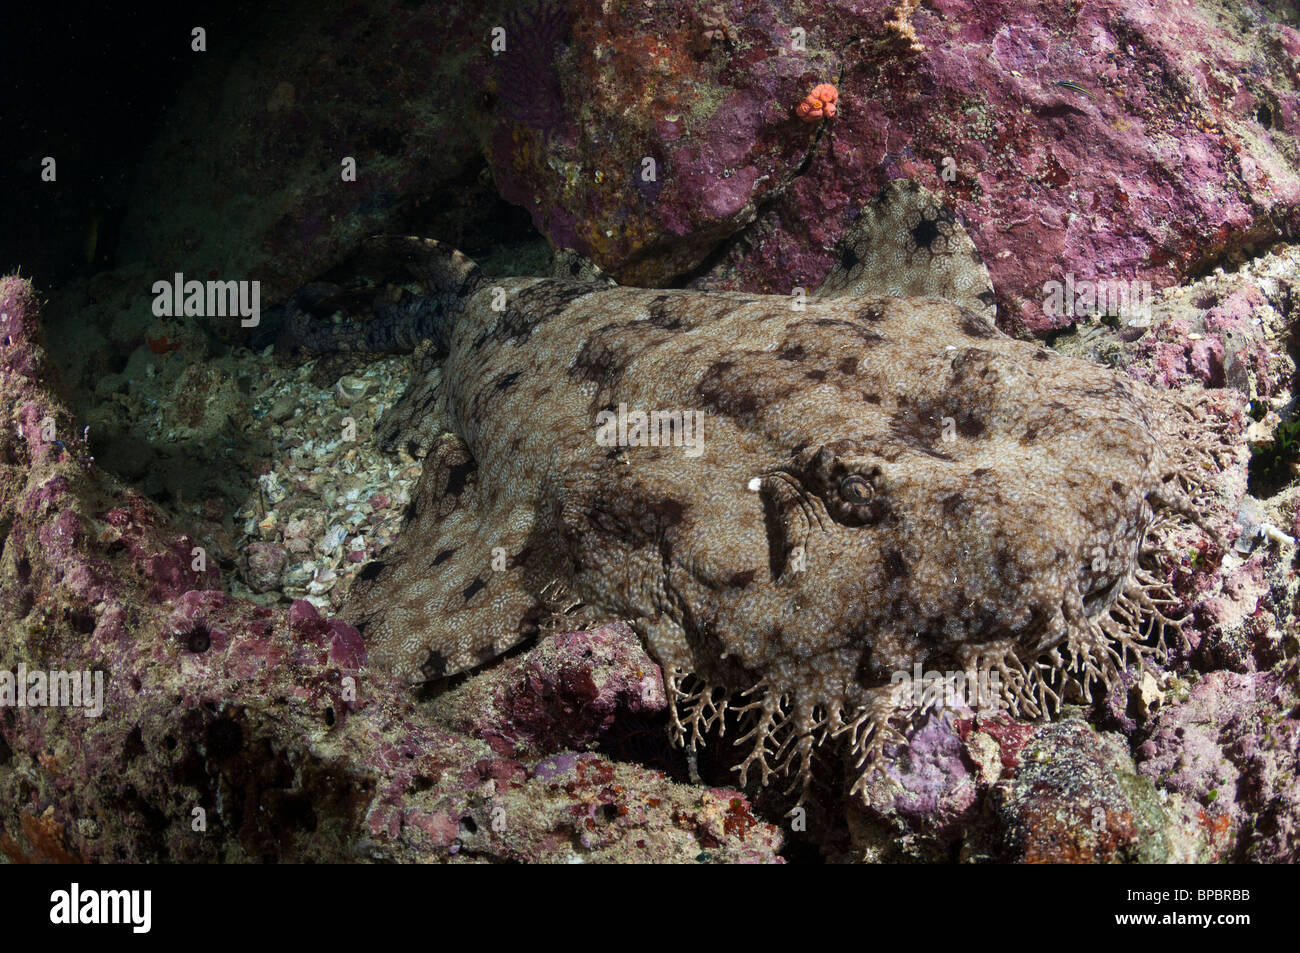 A tasselled wobbegong lying camouflaged on a rocky bottom, Triton Bay, West Papua, Indonesia. Stock Photo